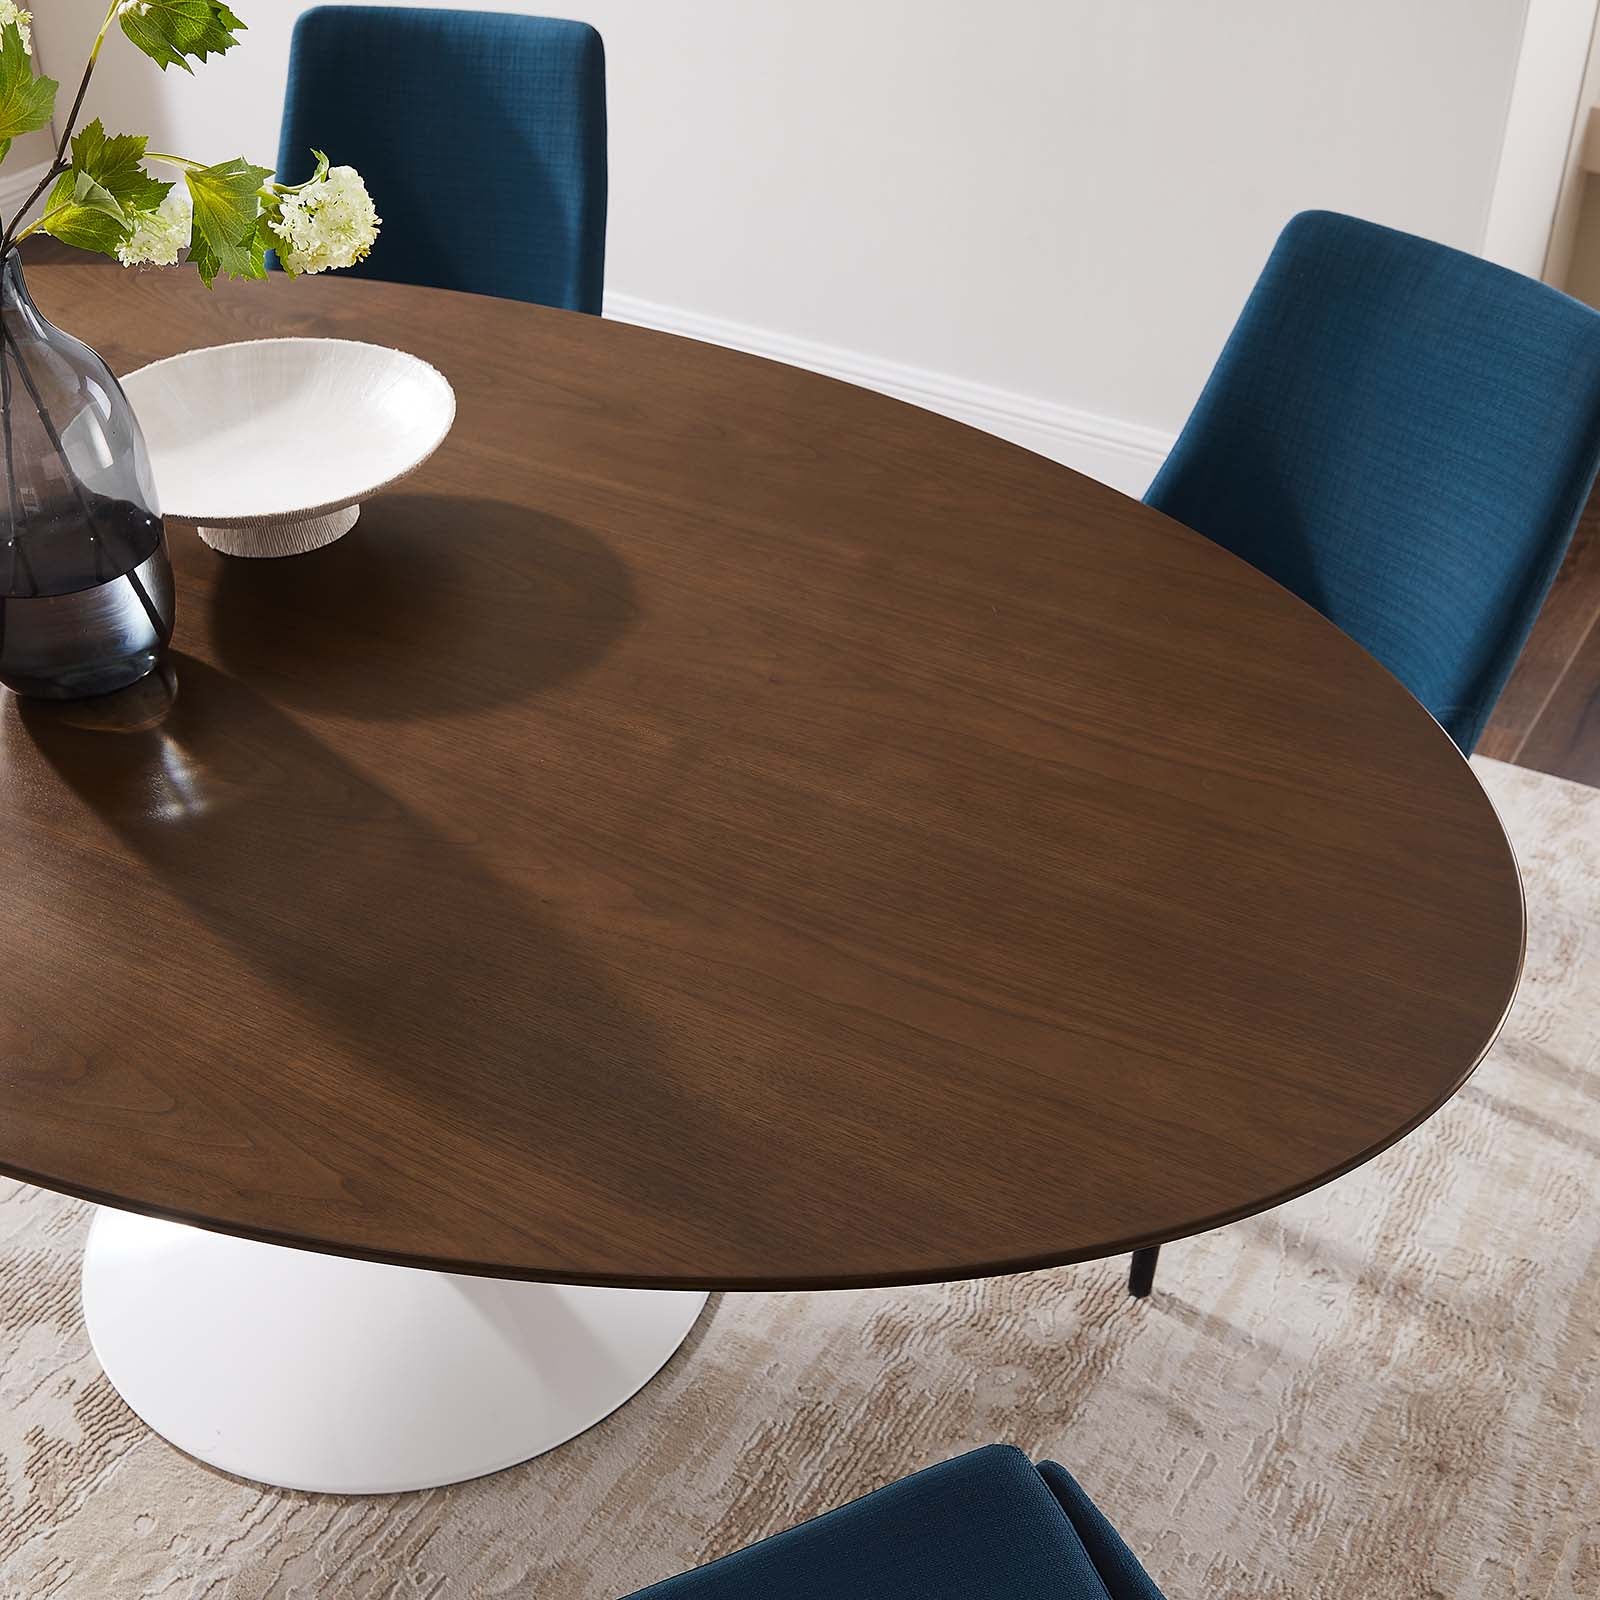 Modway Dining Tables - Lippa 78" Oval Wood Dining Table Walnut